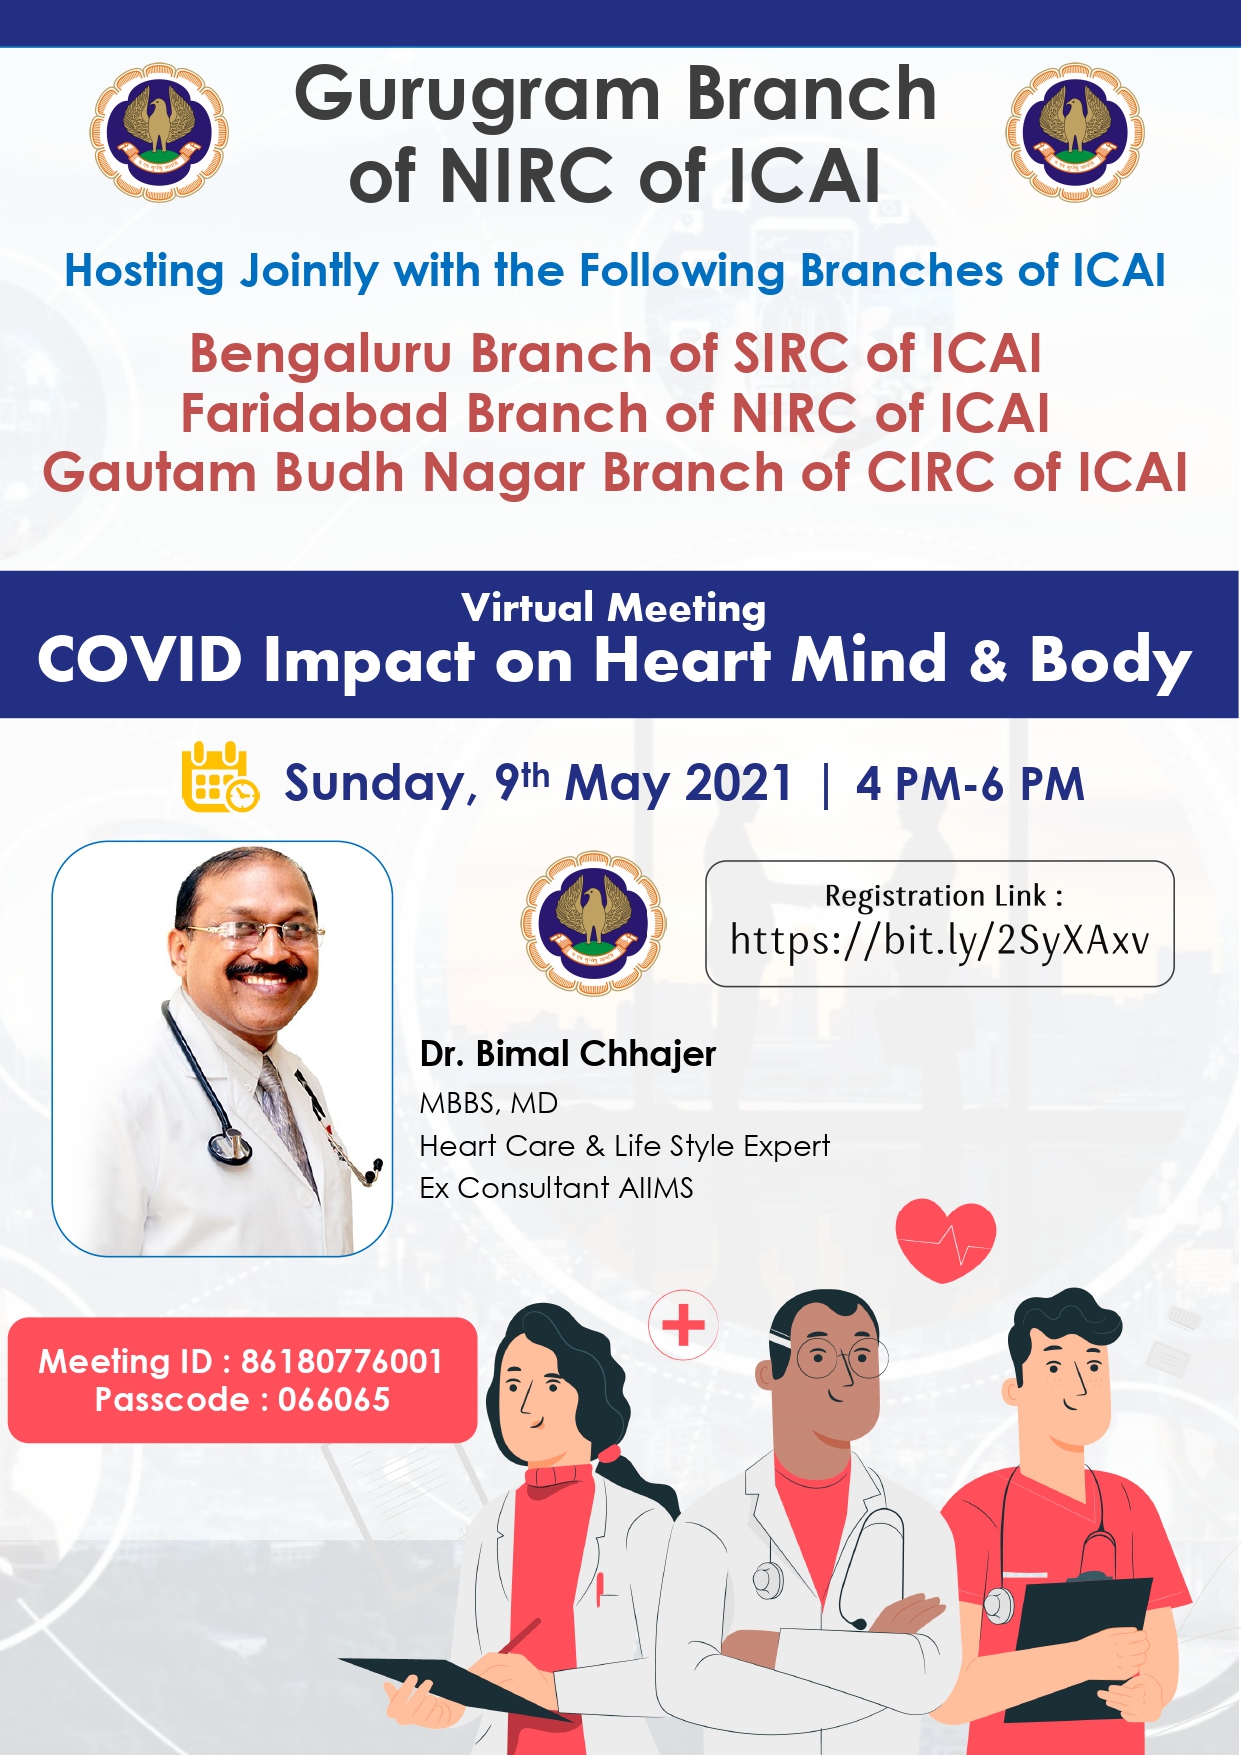 Virtual Meeting on COVID Impact on Heart Mind & Body